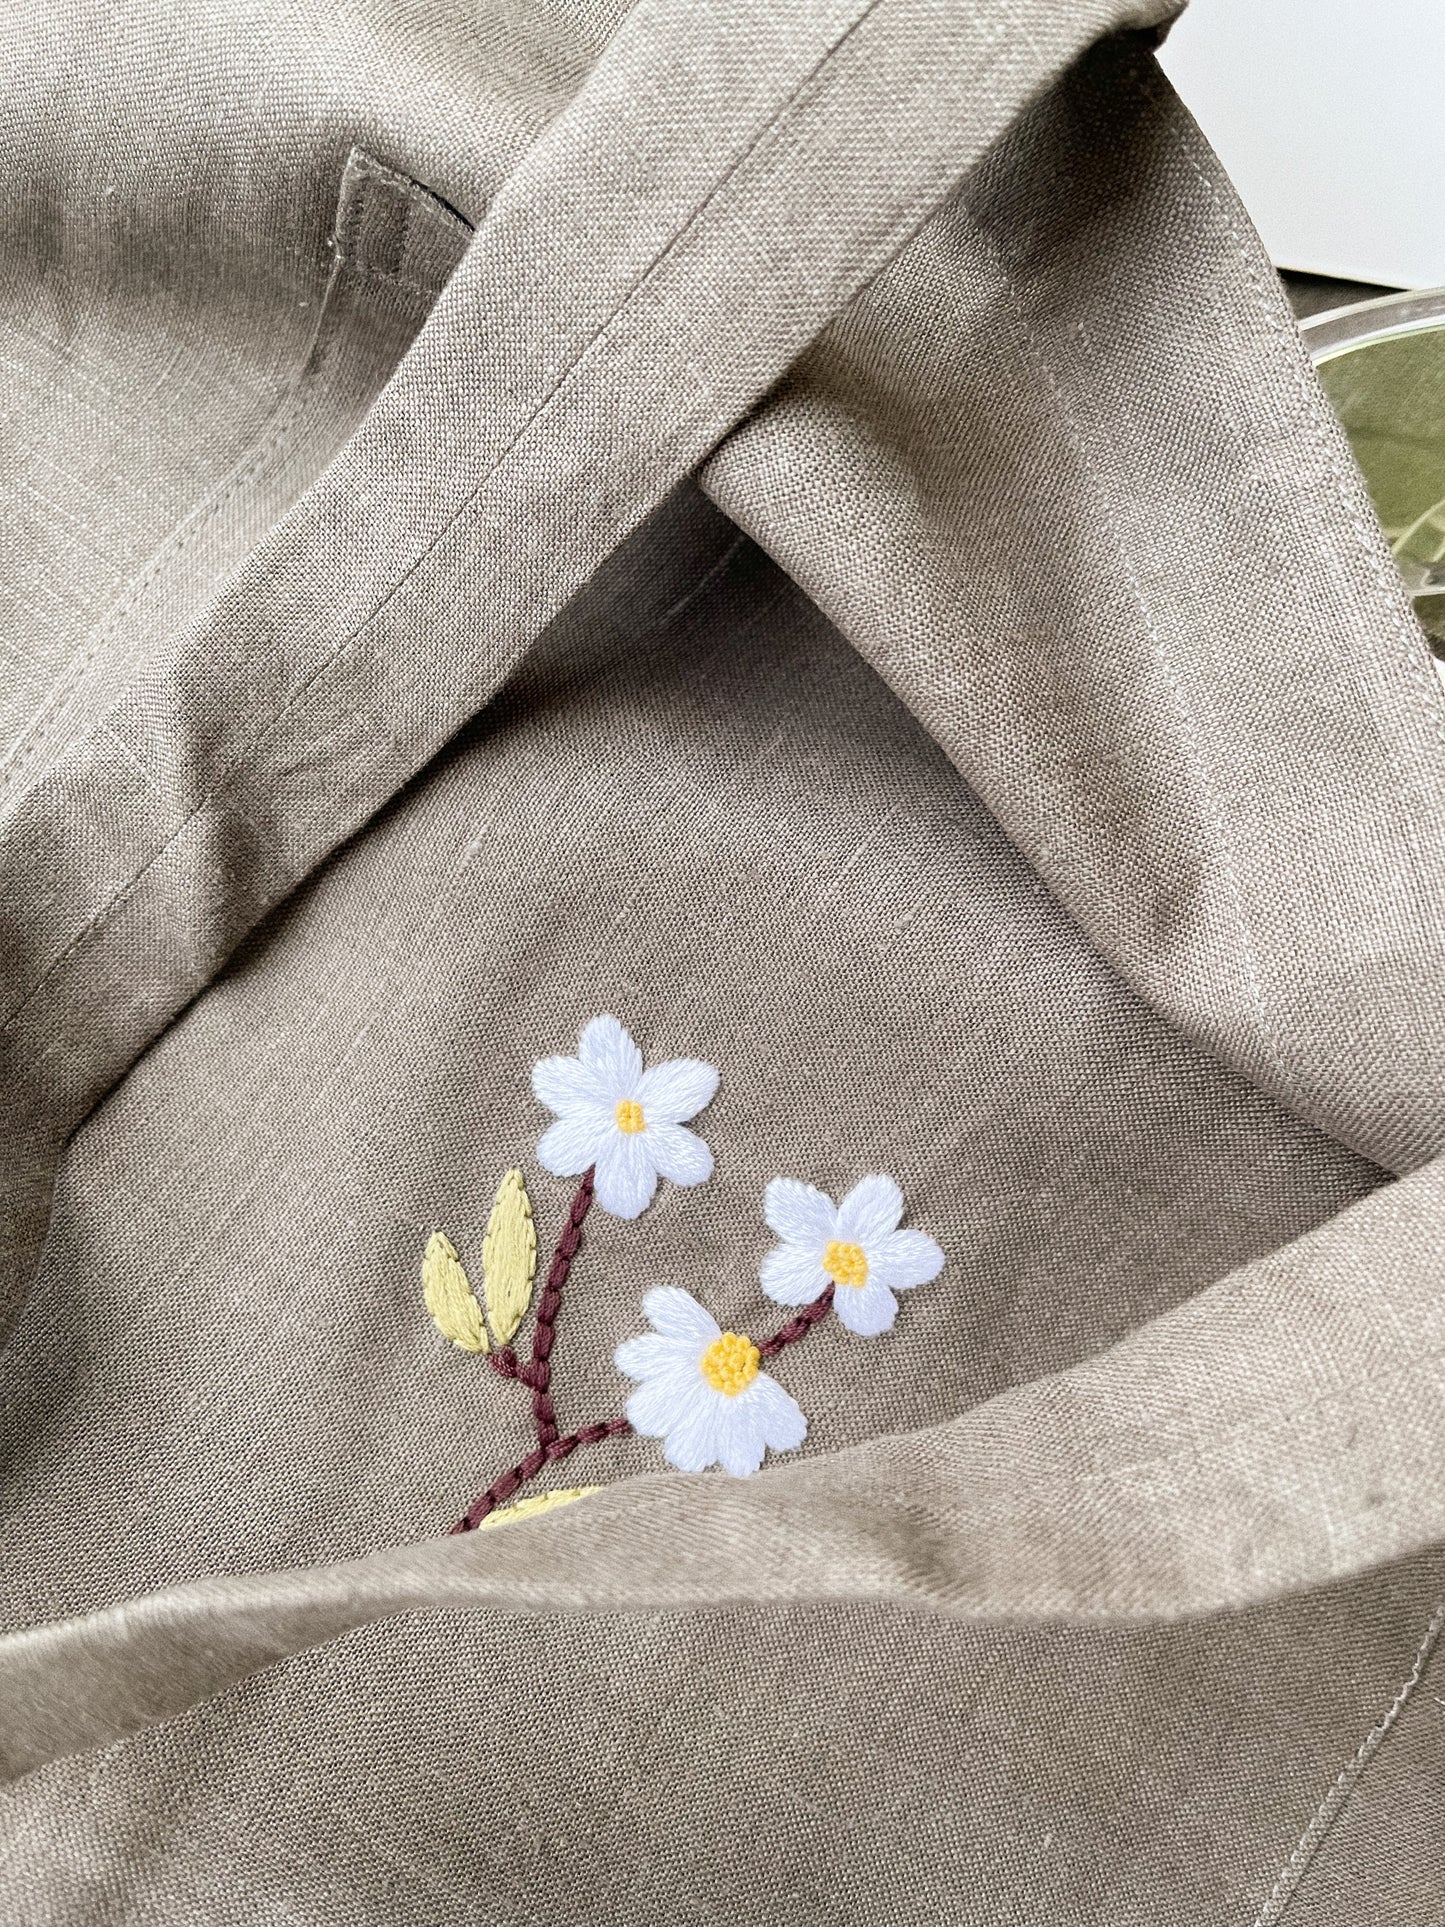 Linen Canvas Tote Bag with Hand Embroidery Daisy Flower 